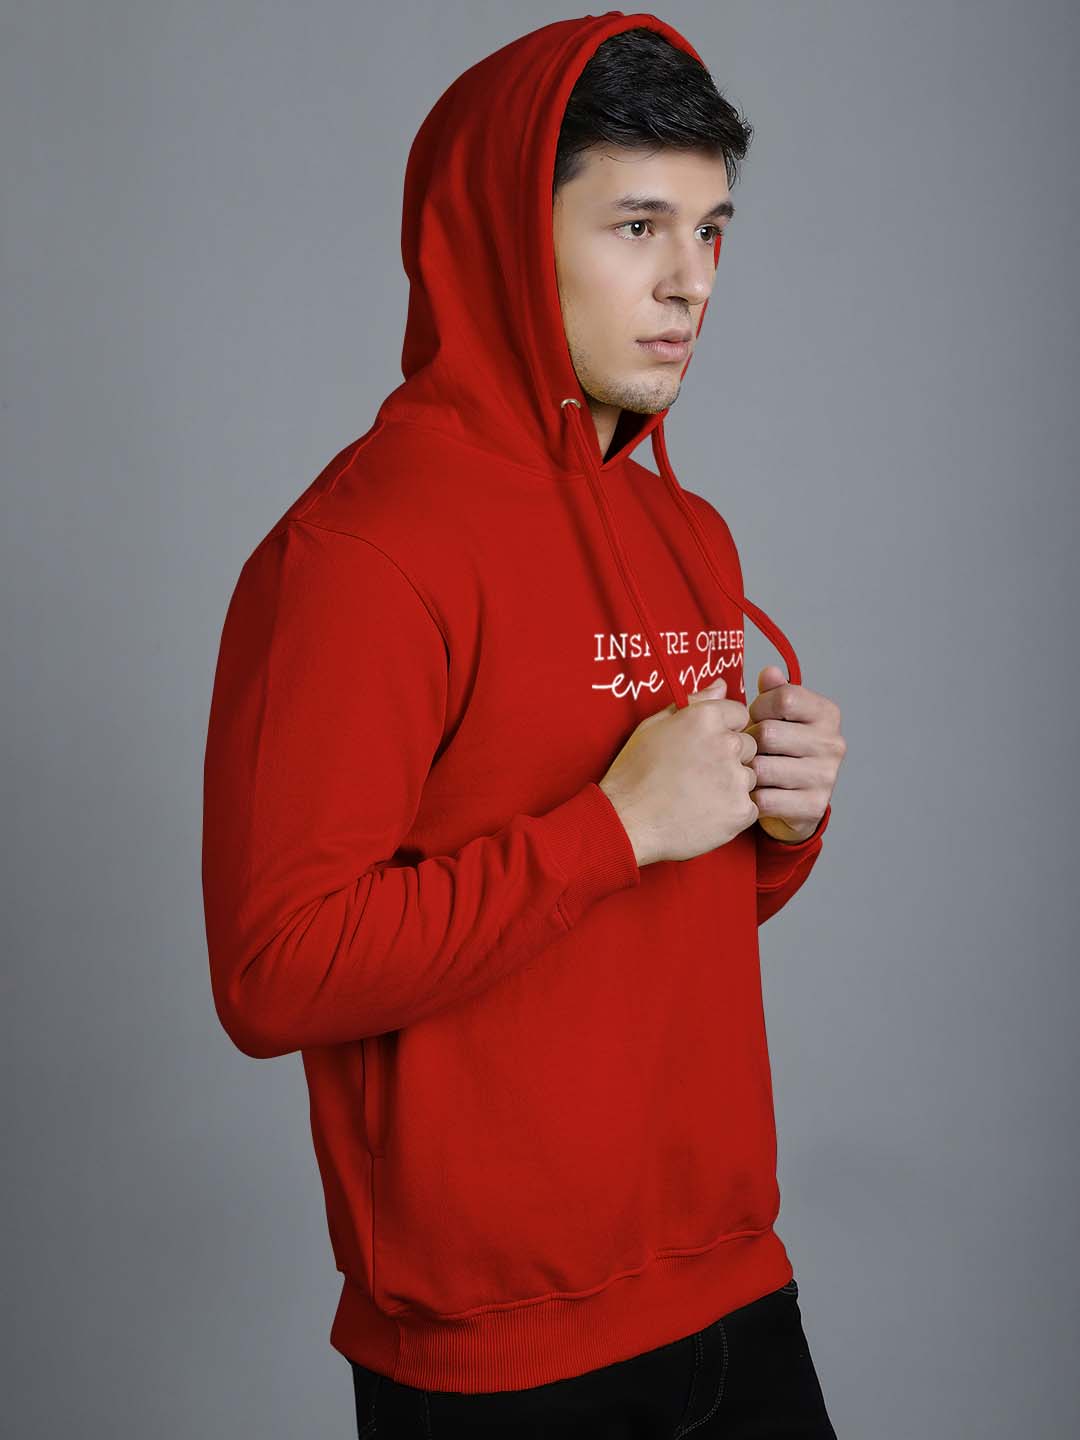 Men's Inspire Others Everyday  Full Sleeves Hoody T-Shirt - Friskers